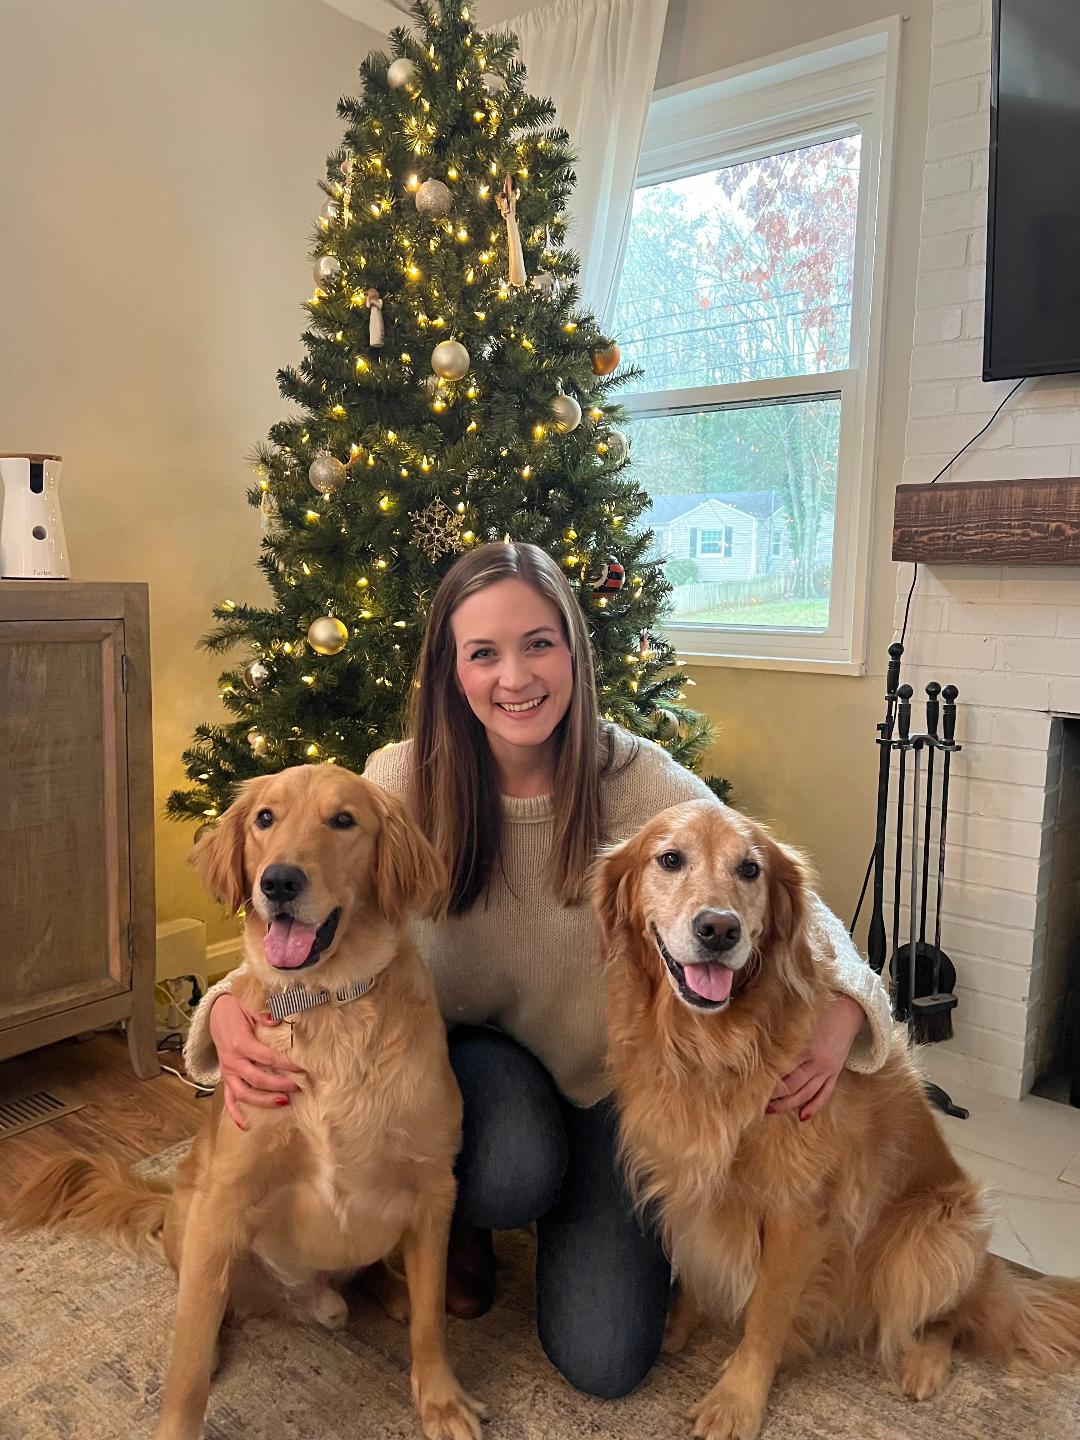 Woman squatting on the floor with two golden retrievers in front of a Christmas tree